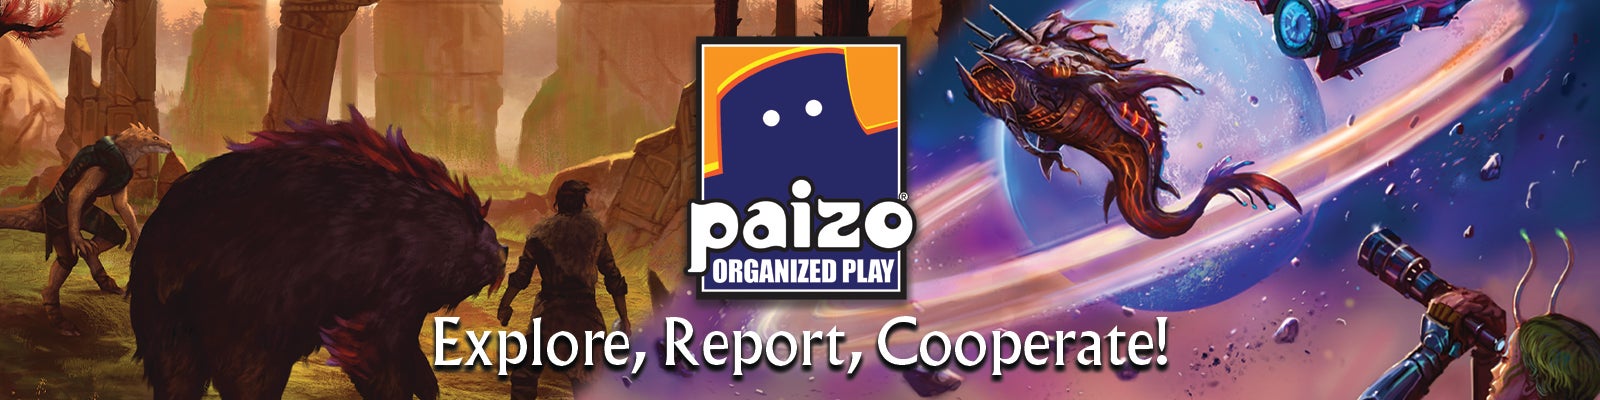 Pathfinder illustration of a bear in the woods and Starfinder Illustration of a ringed planet floating in space behind the Paizo Organized Play logo